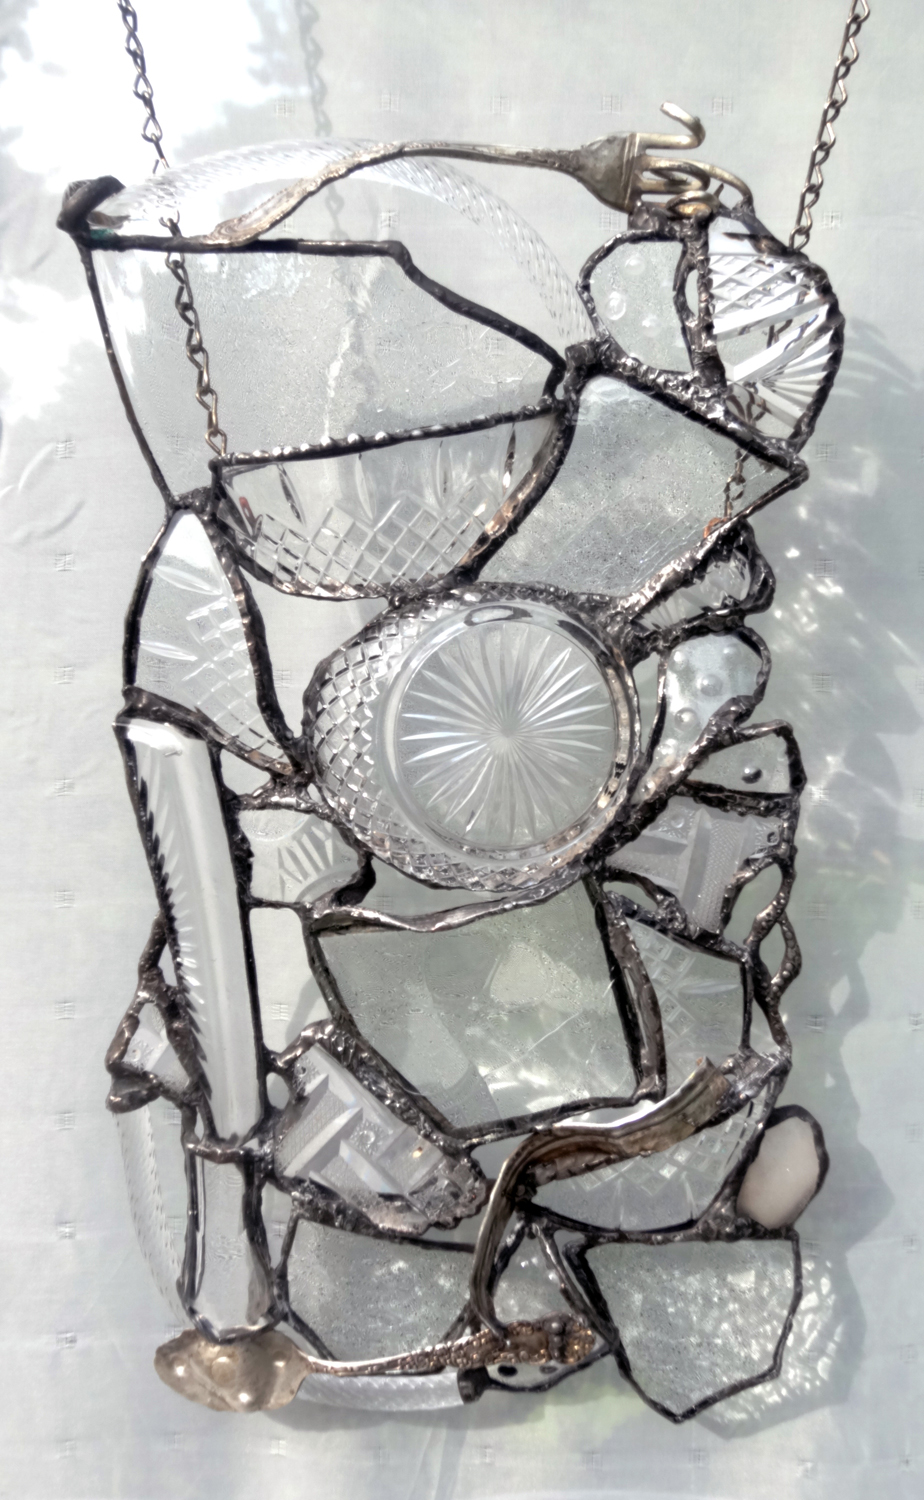 ELEQUENT ~ 14"X8" Repurposed glass and hand-forged recycled metals